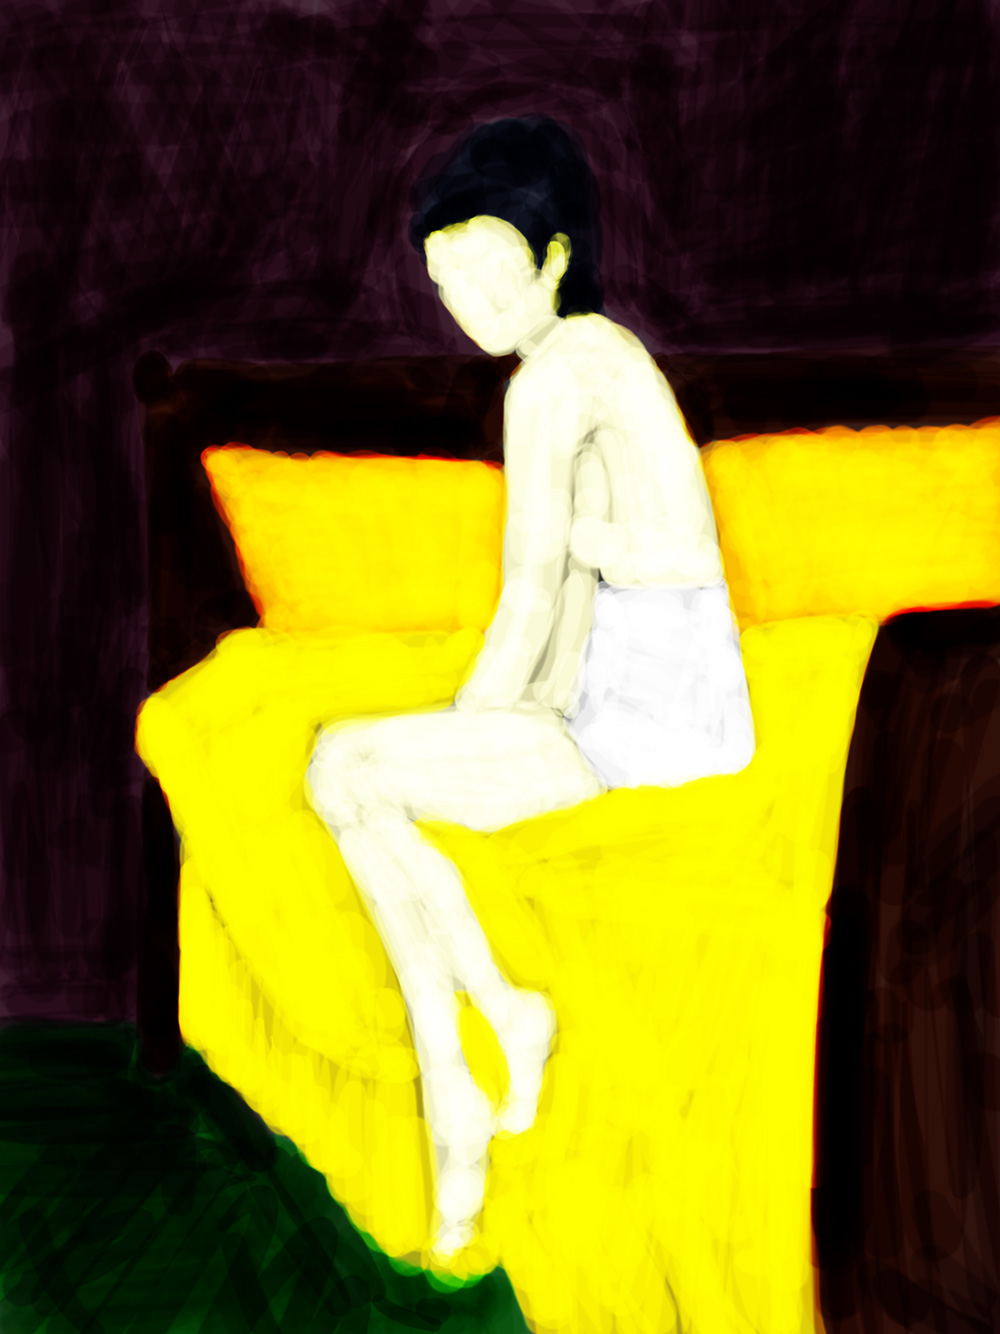 On The Bed, iPad drawing by Guido Vrolix